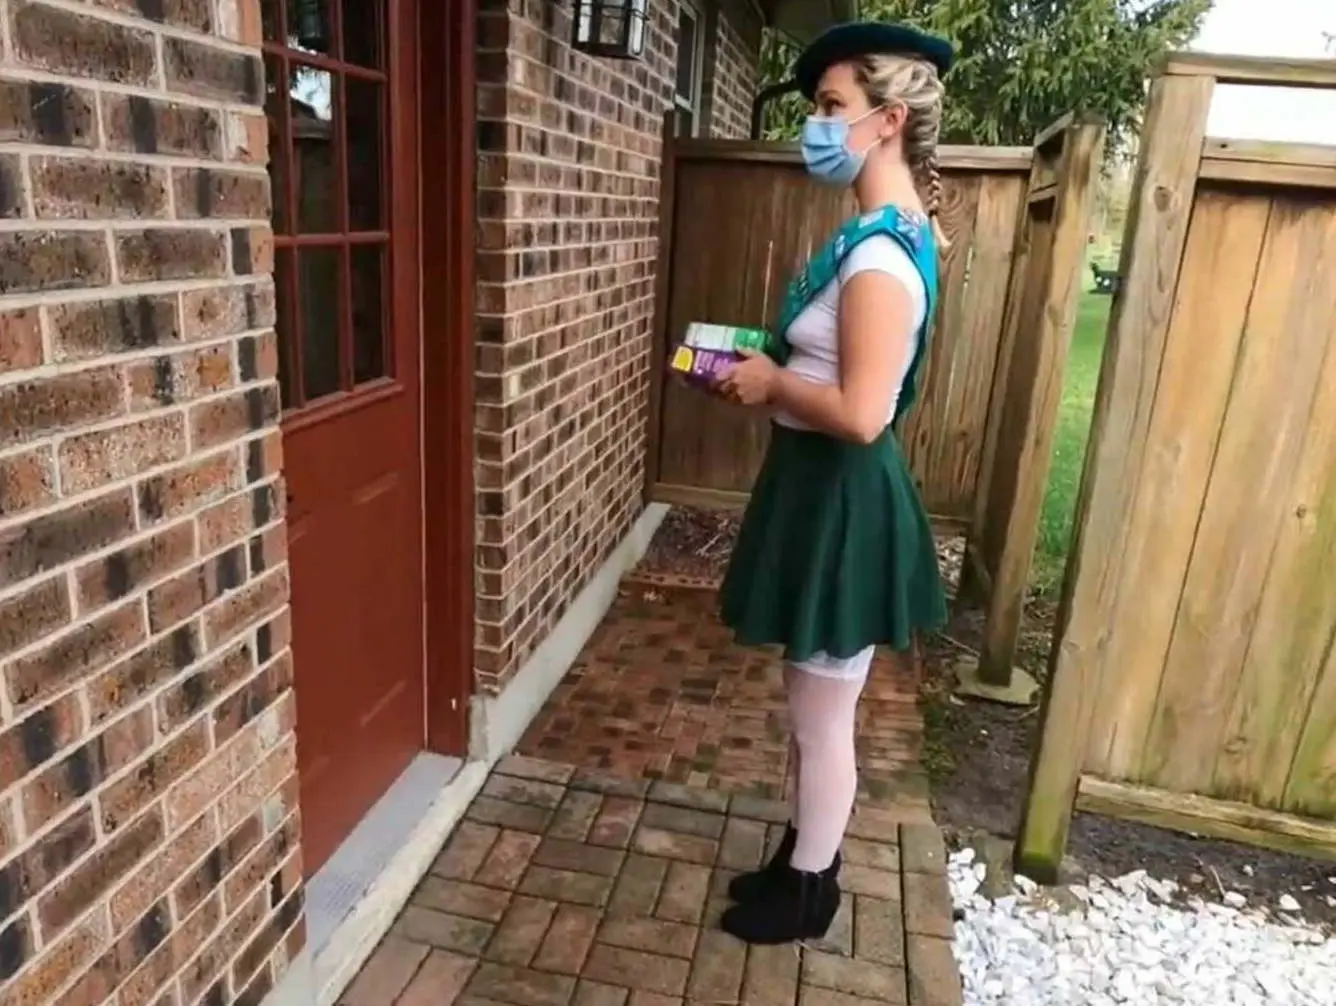 Girl scout selling cookies gets fucked by older